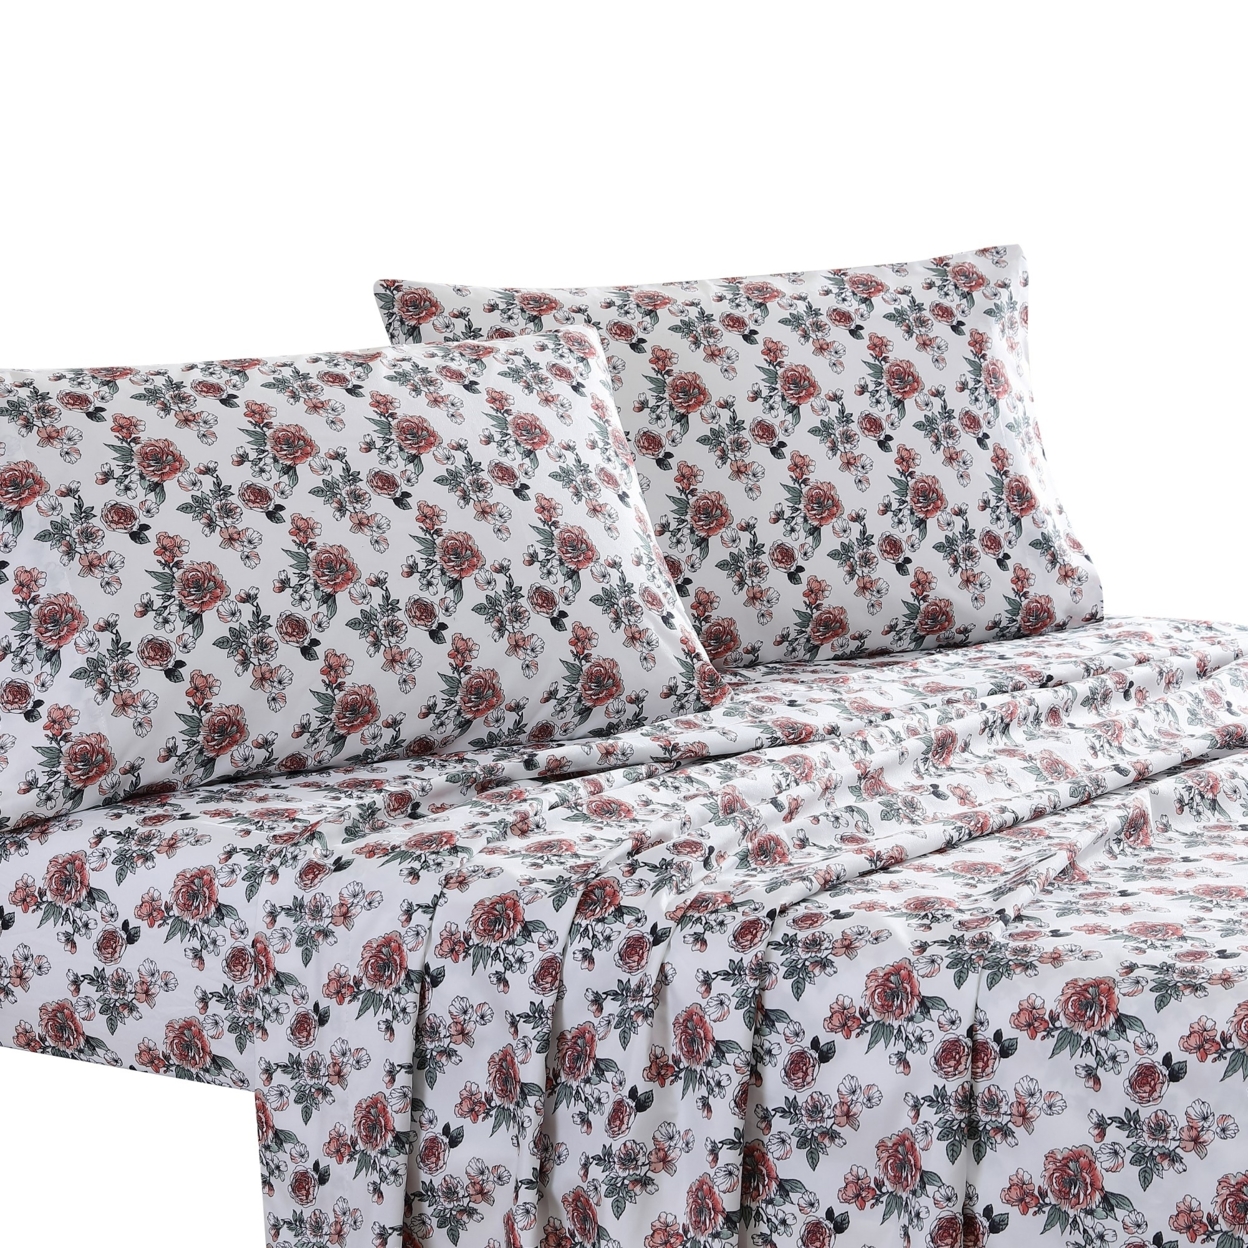 Veria 4 Piece Queen Bedsheet Set With Rose Print The Urban Port, White And Pink- Saltoro Sherpi